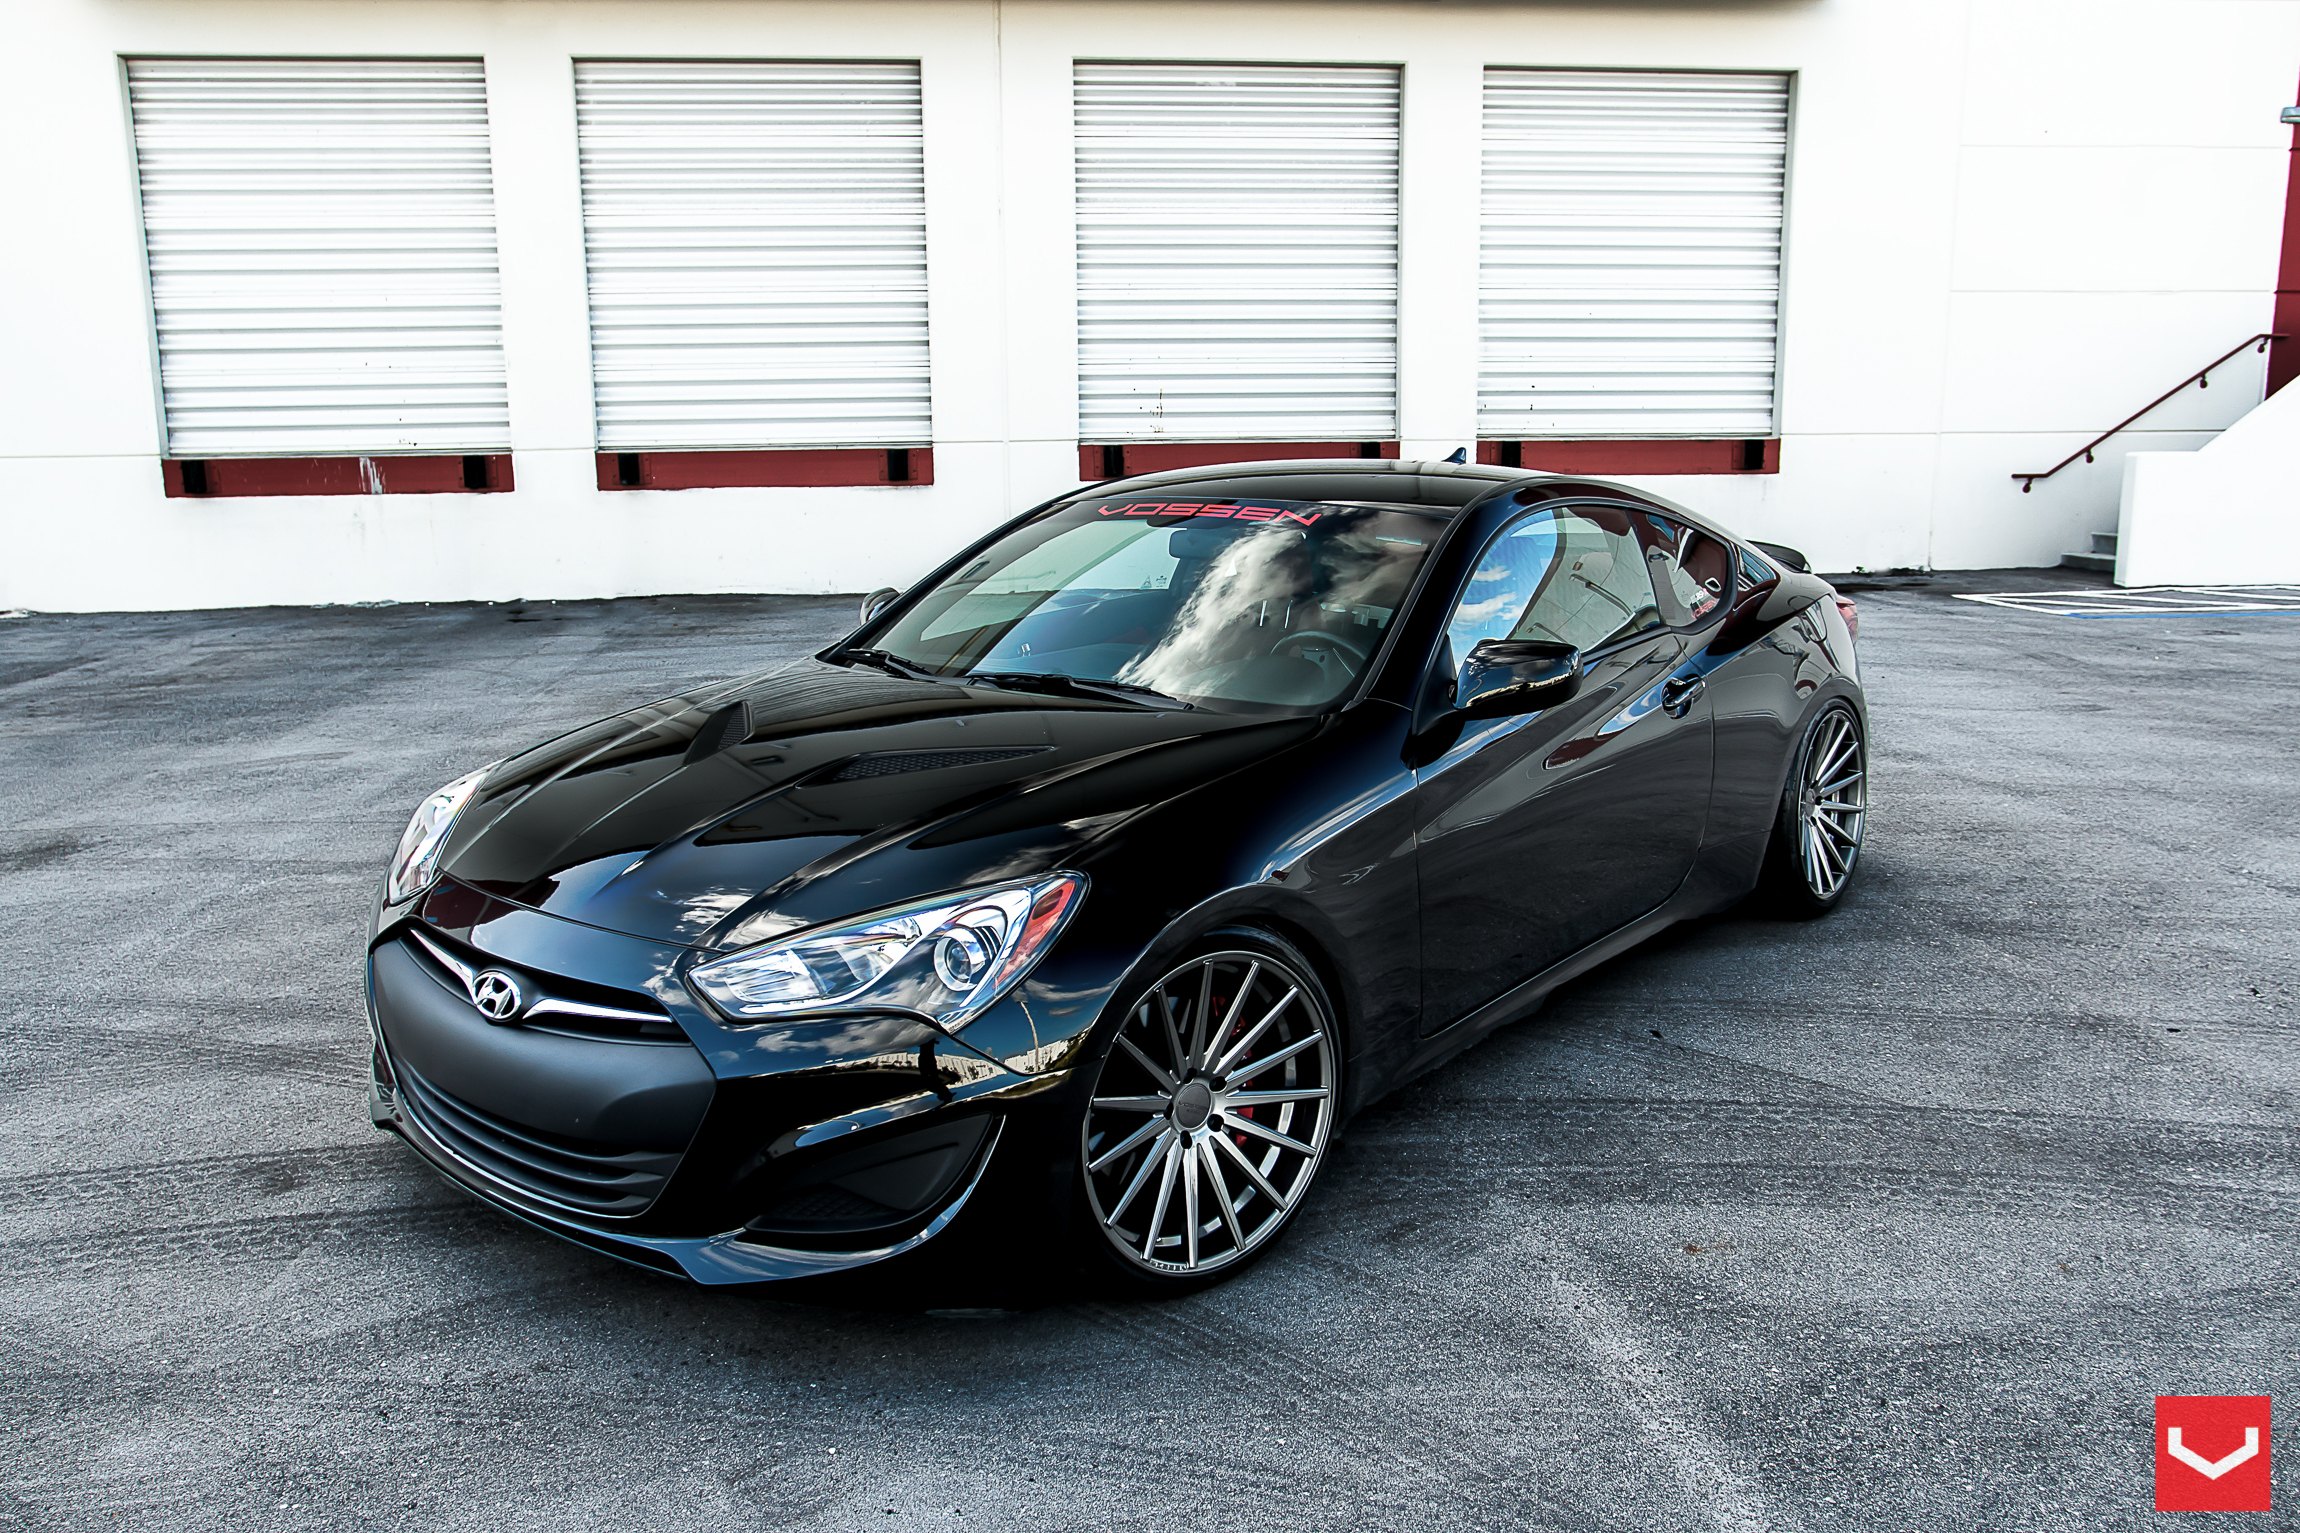 Vossen VFS Rims with Red Brakes on Black Hyundai Genesis Coupe - Photo by Vossen